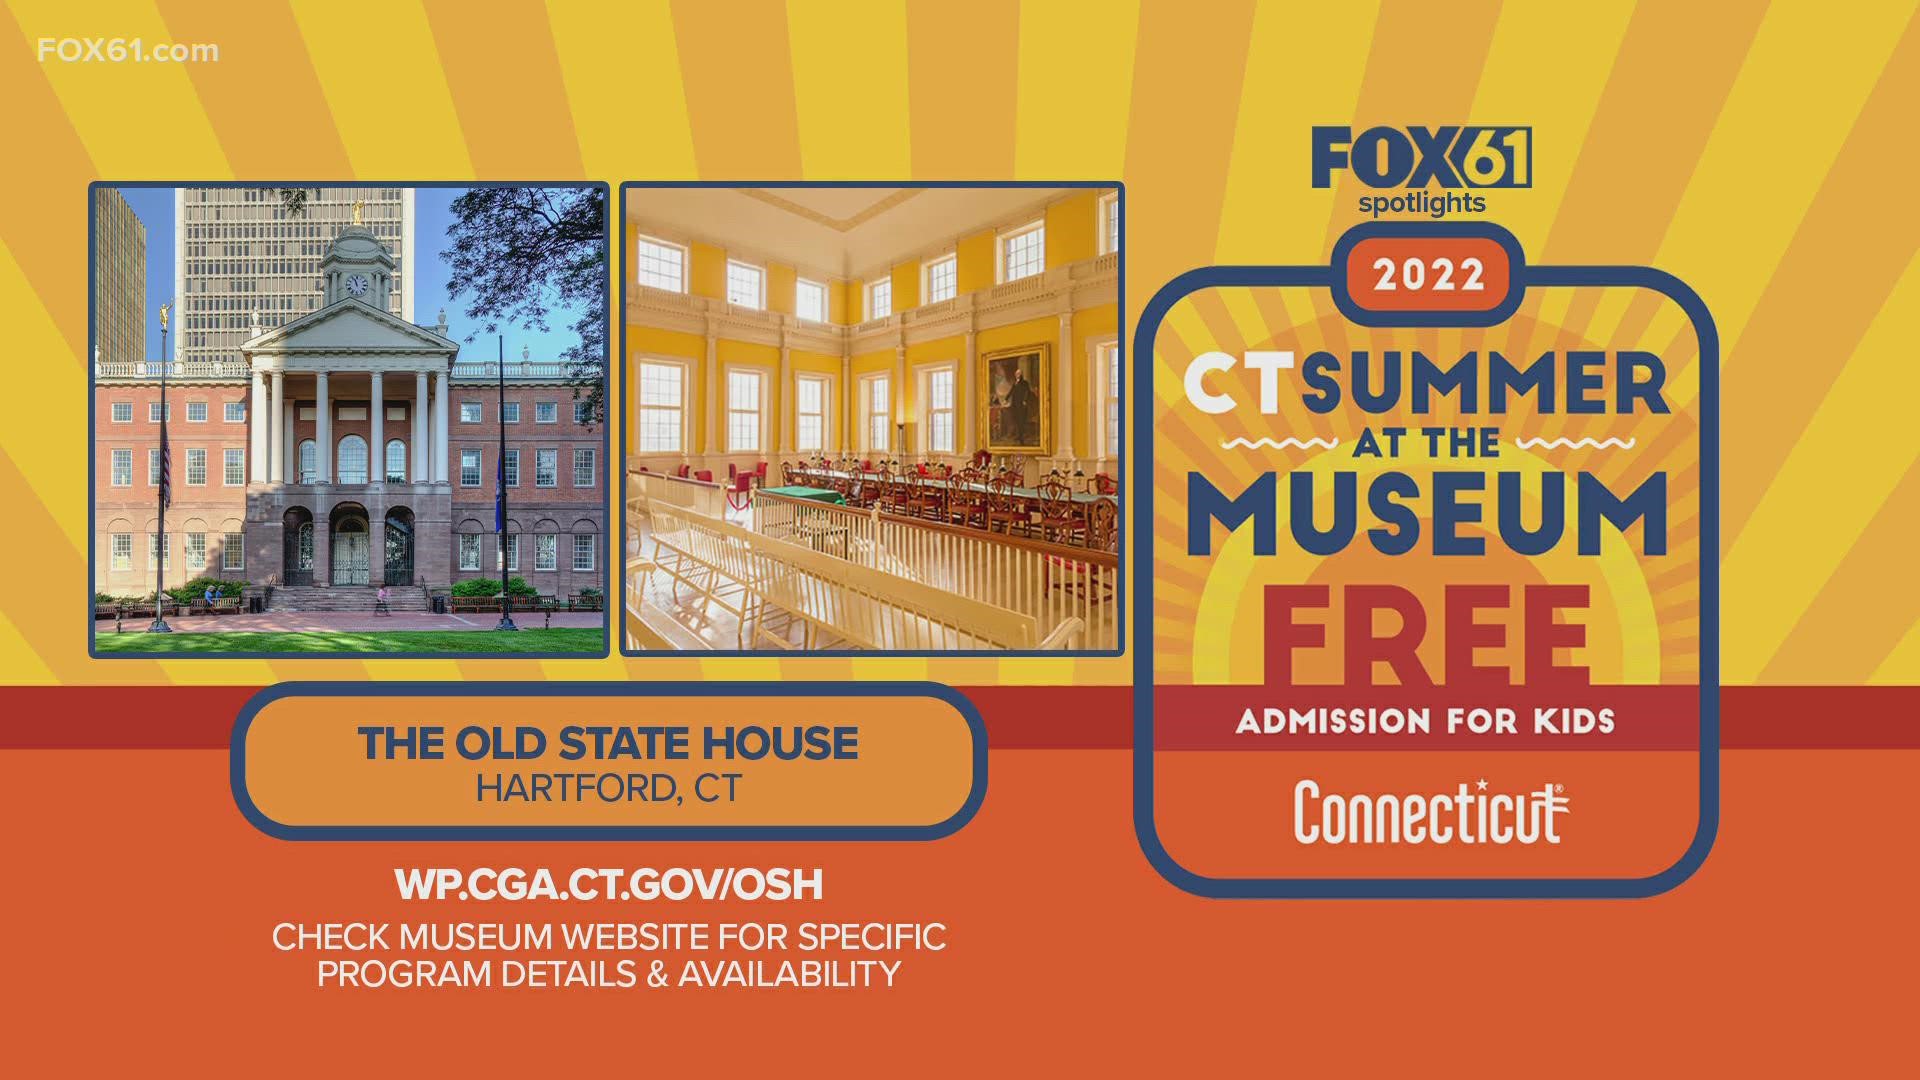 Kids 18 and under can visit The Old State House for free with an adult who is a resident of Connecticut. It runs through Sept. 5.